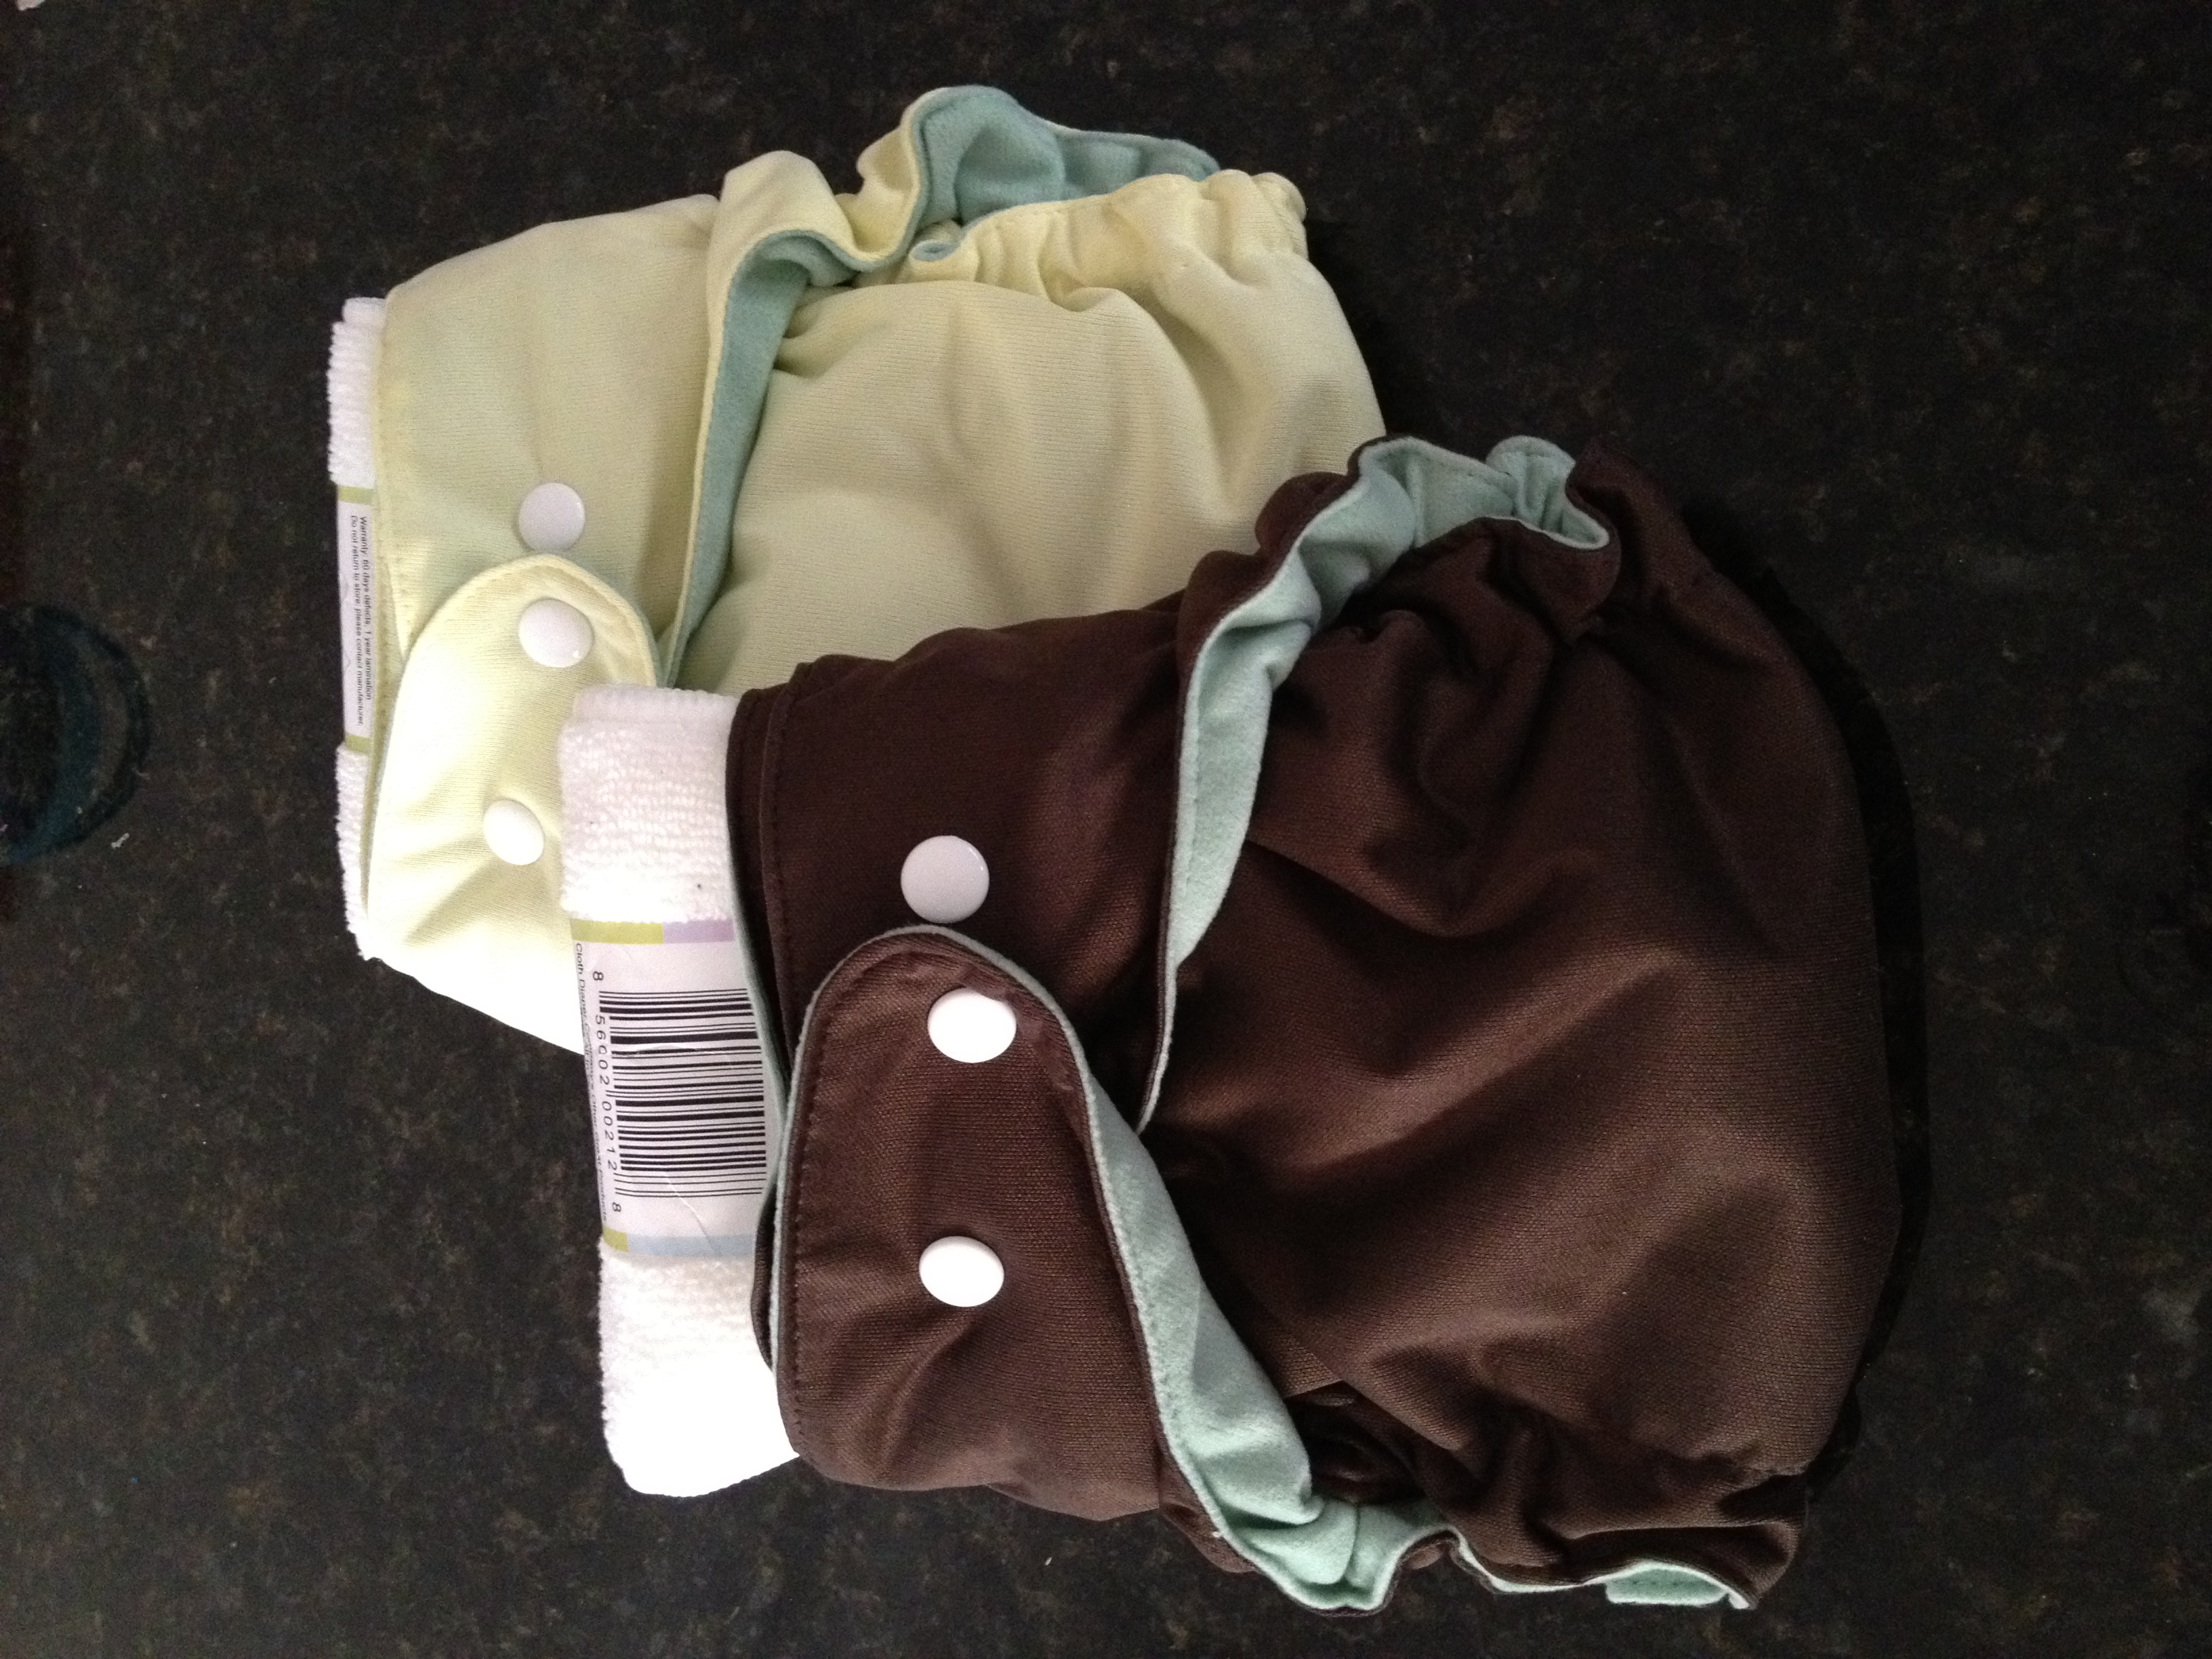 Two Rocky Mountain Diapers donated from Tara Pitcher with Elemeno-Pee